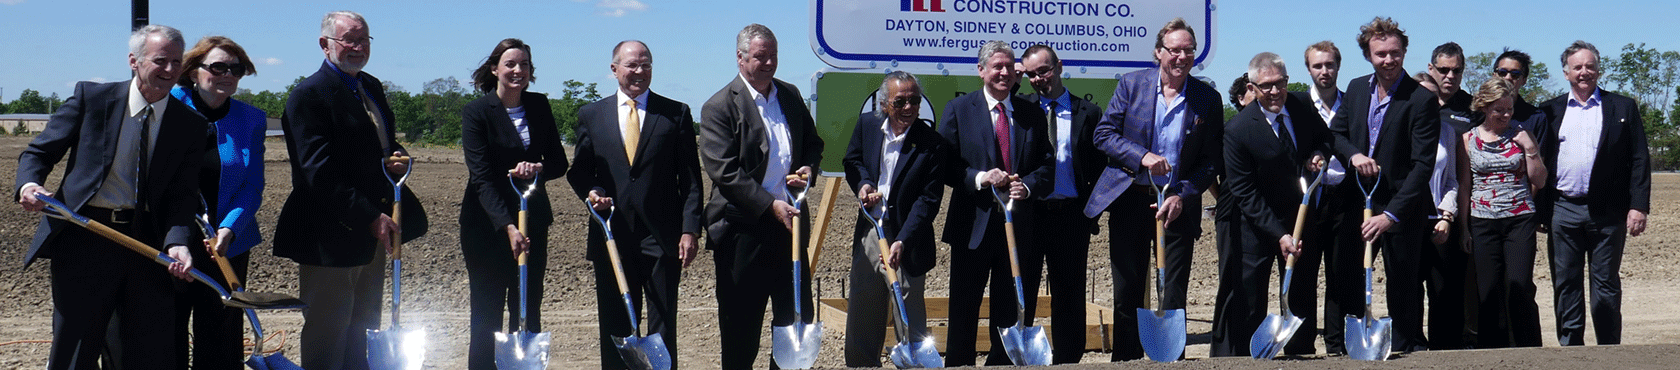 Group posing with shovels at future facility site